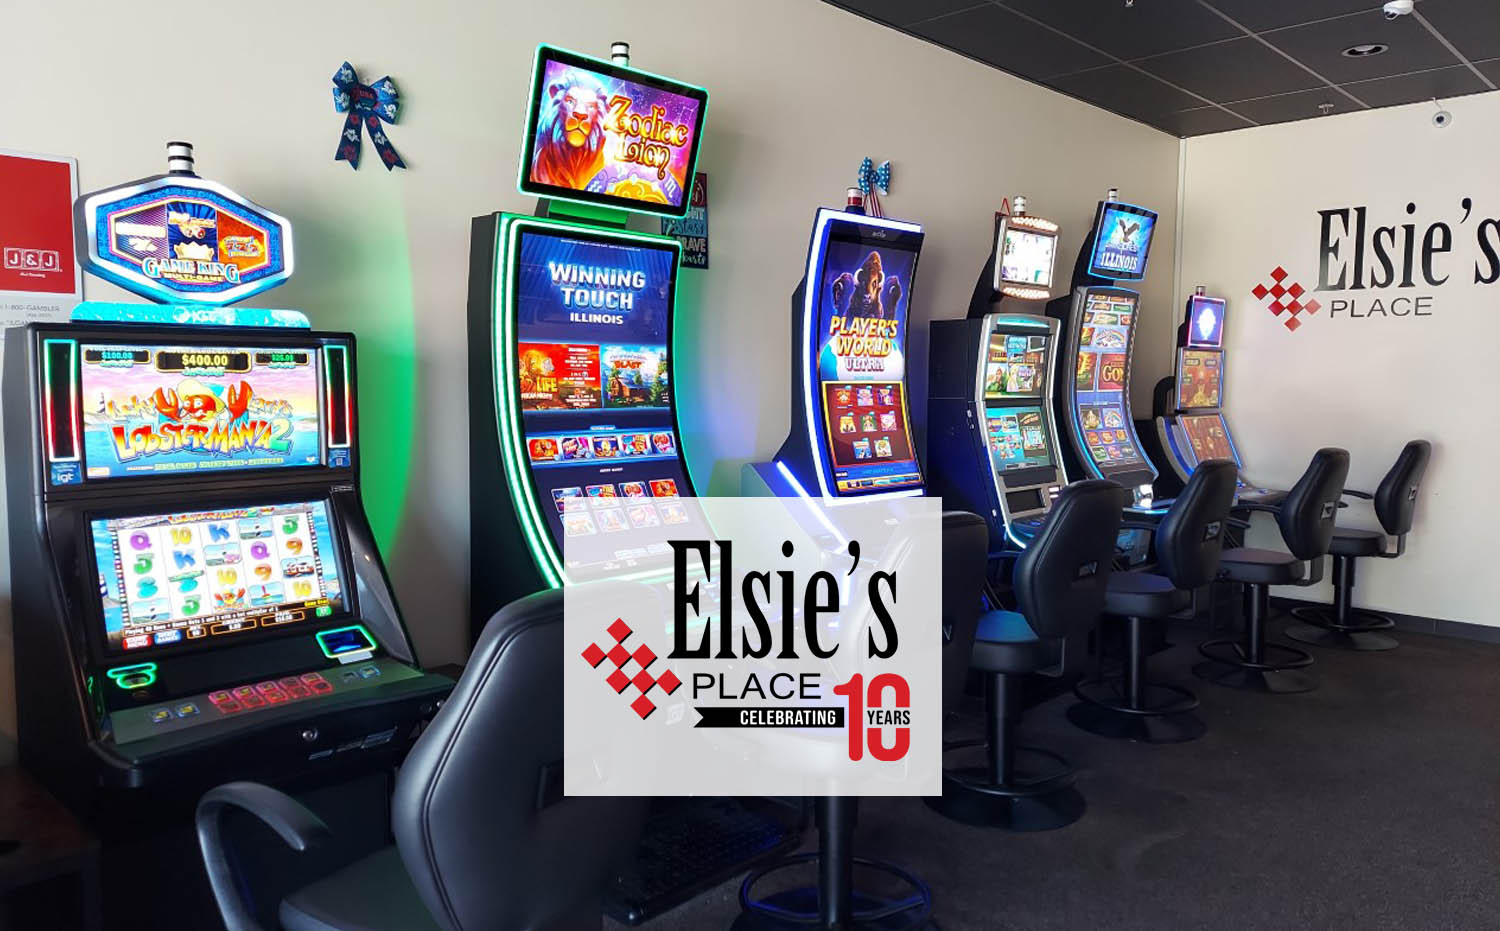 10 Year Anniversary For Elsie's Place